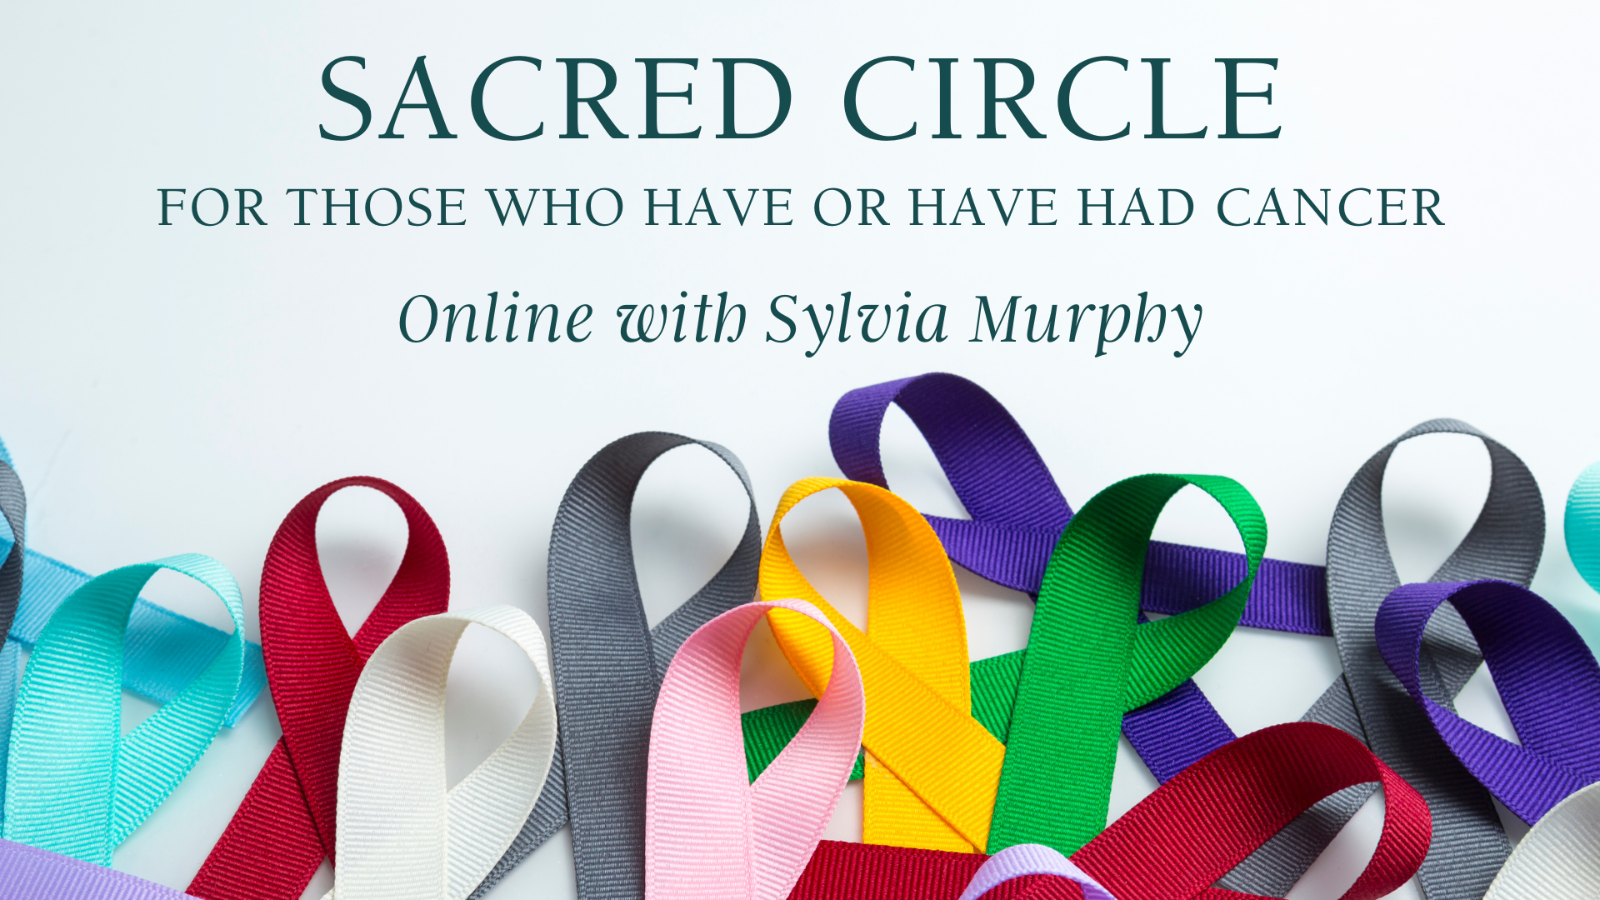 Sacred Circle Cancer Support Group